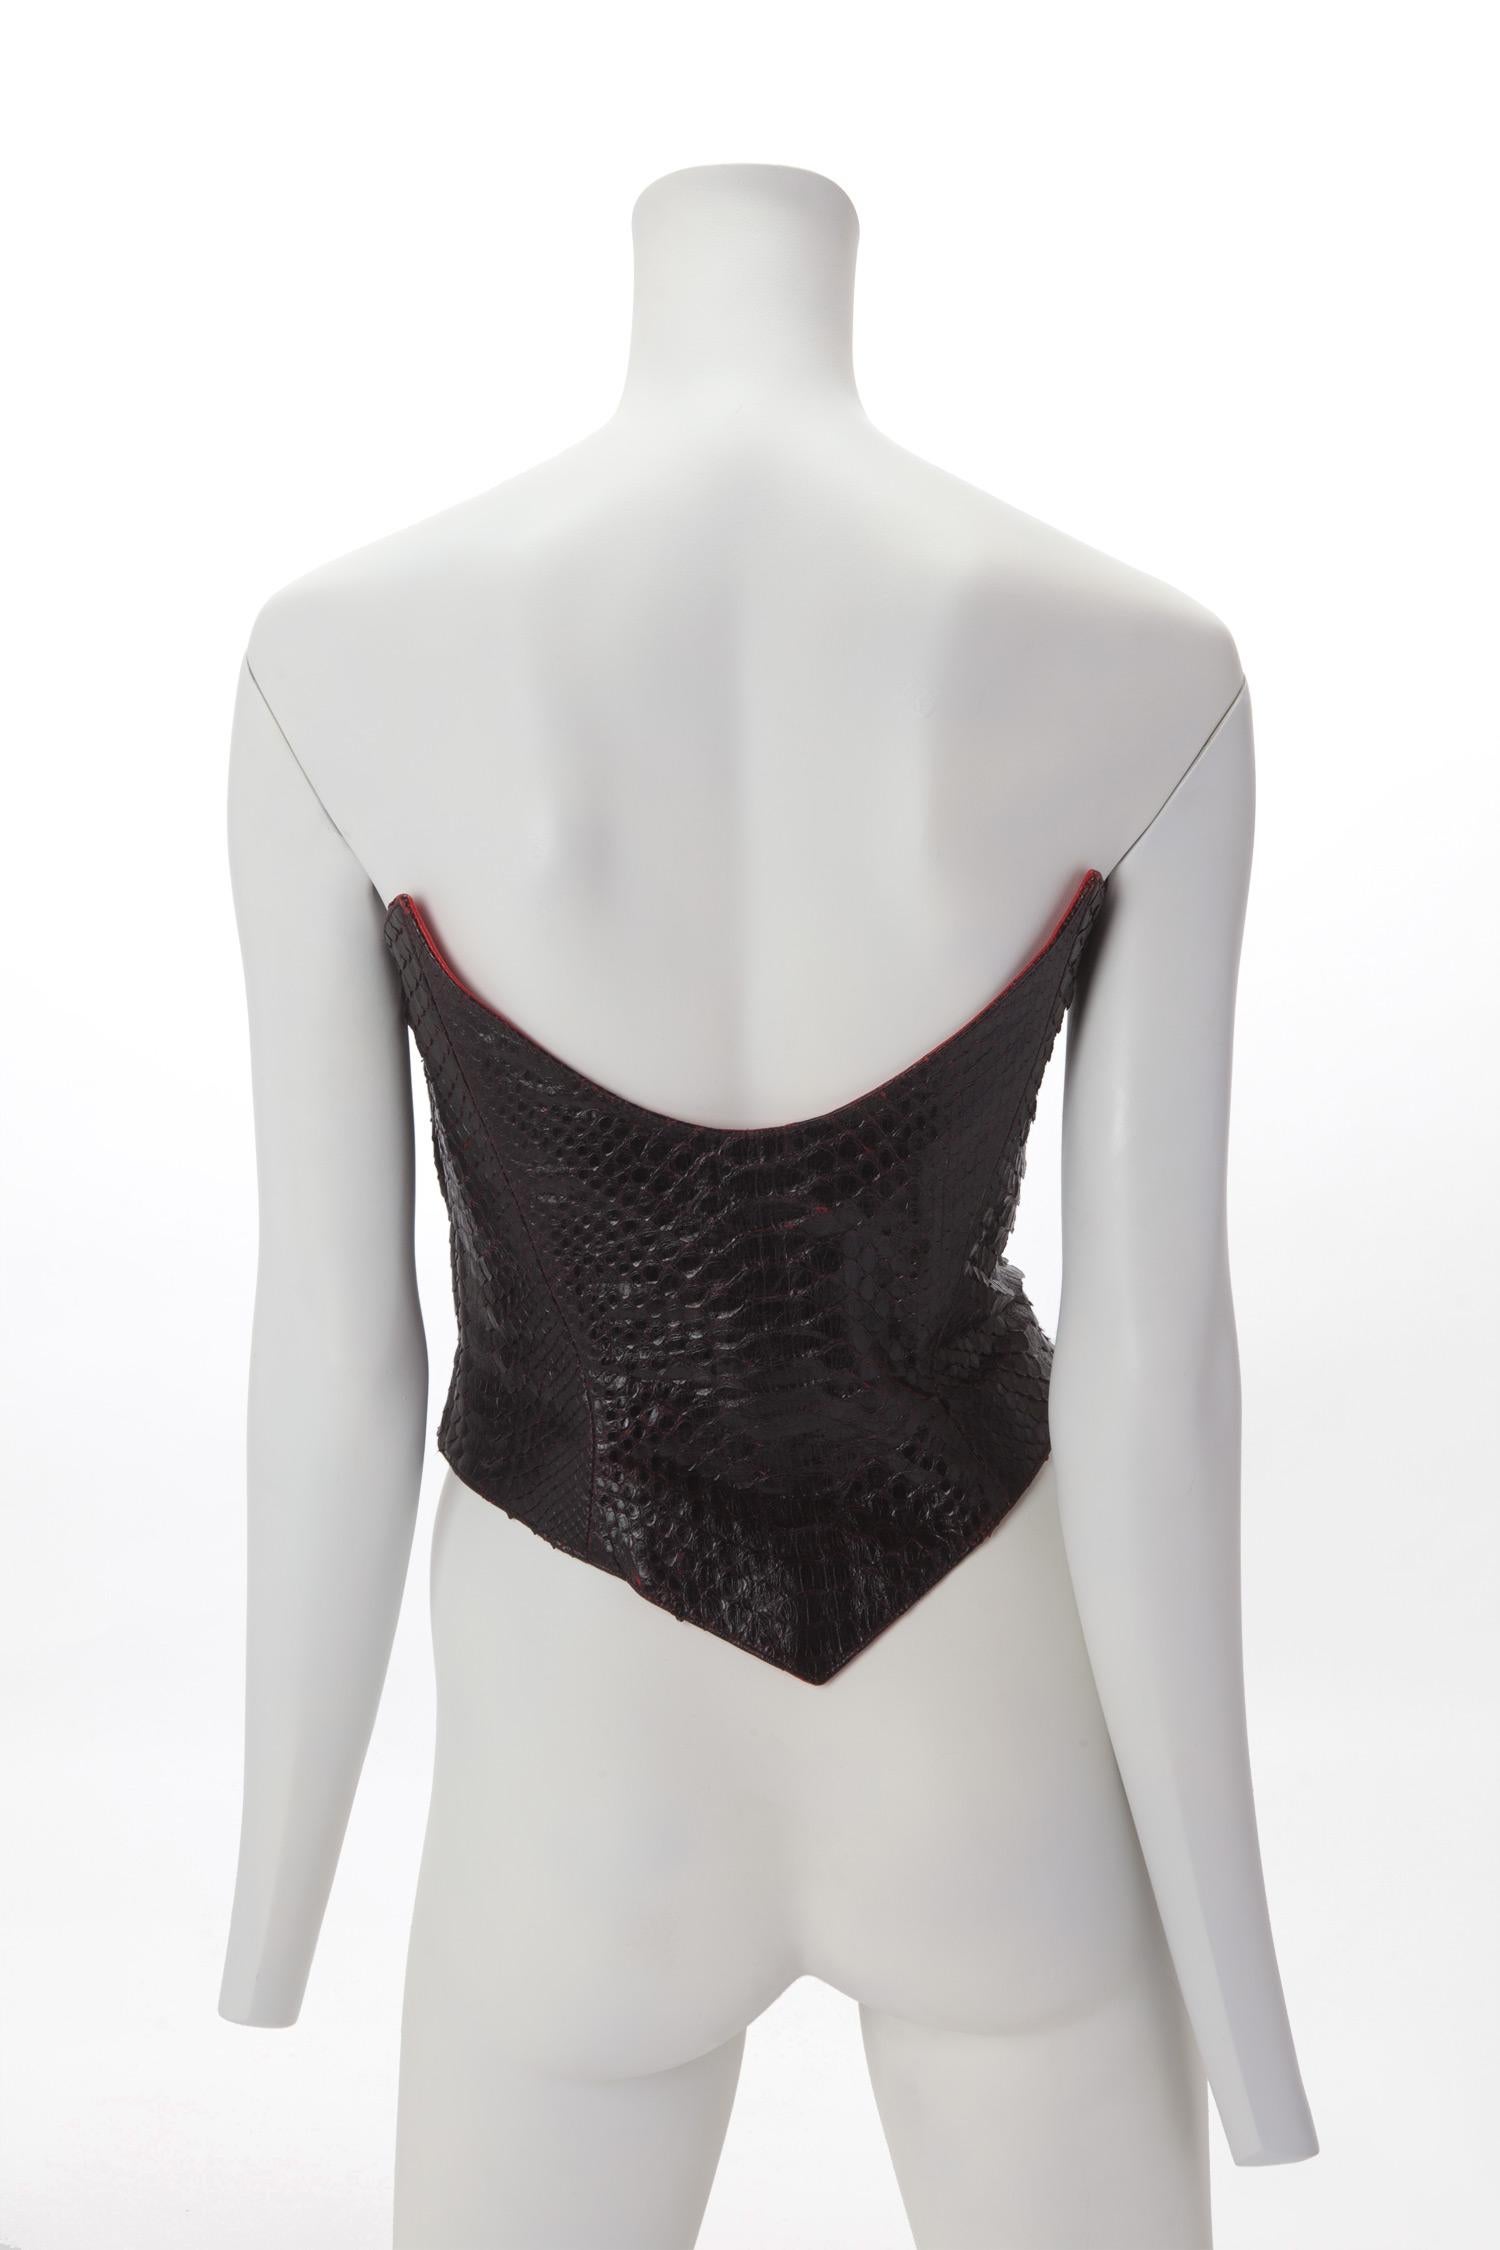 c. 1990's Thierry Mugler Couture Black Python Corset Rare In Good Condition For Sale In New York, NY